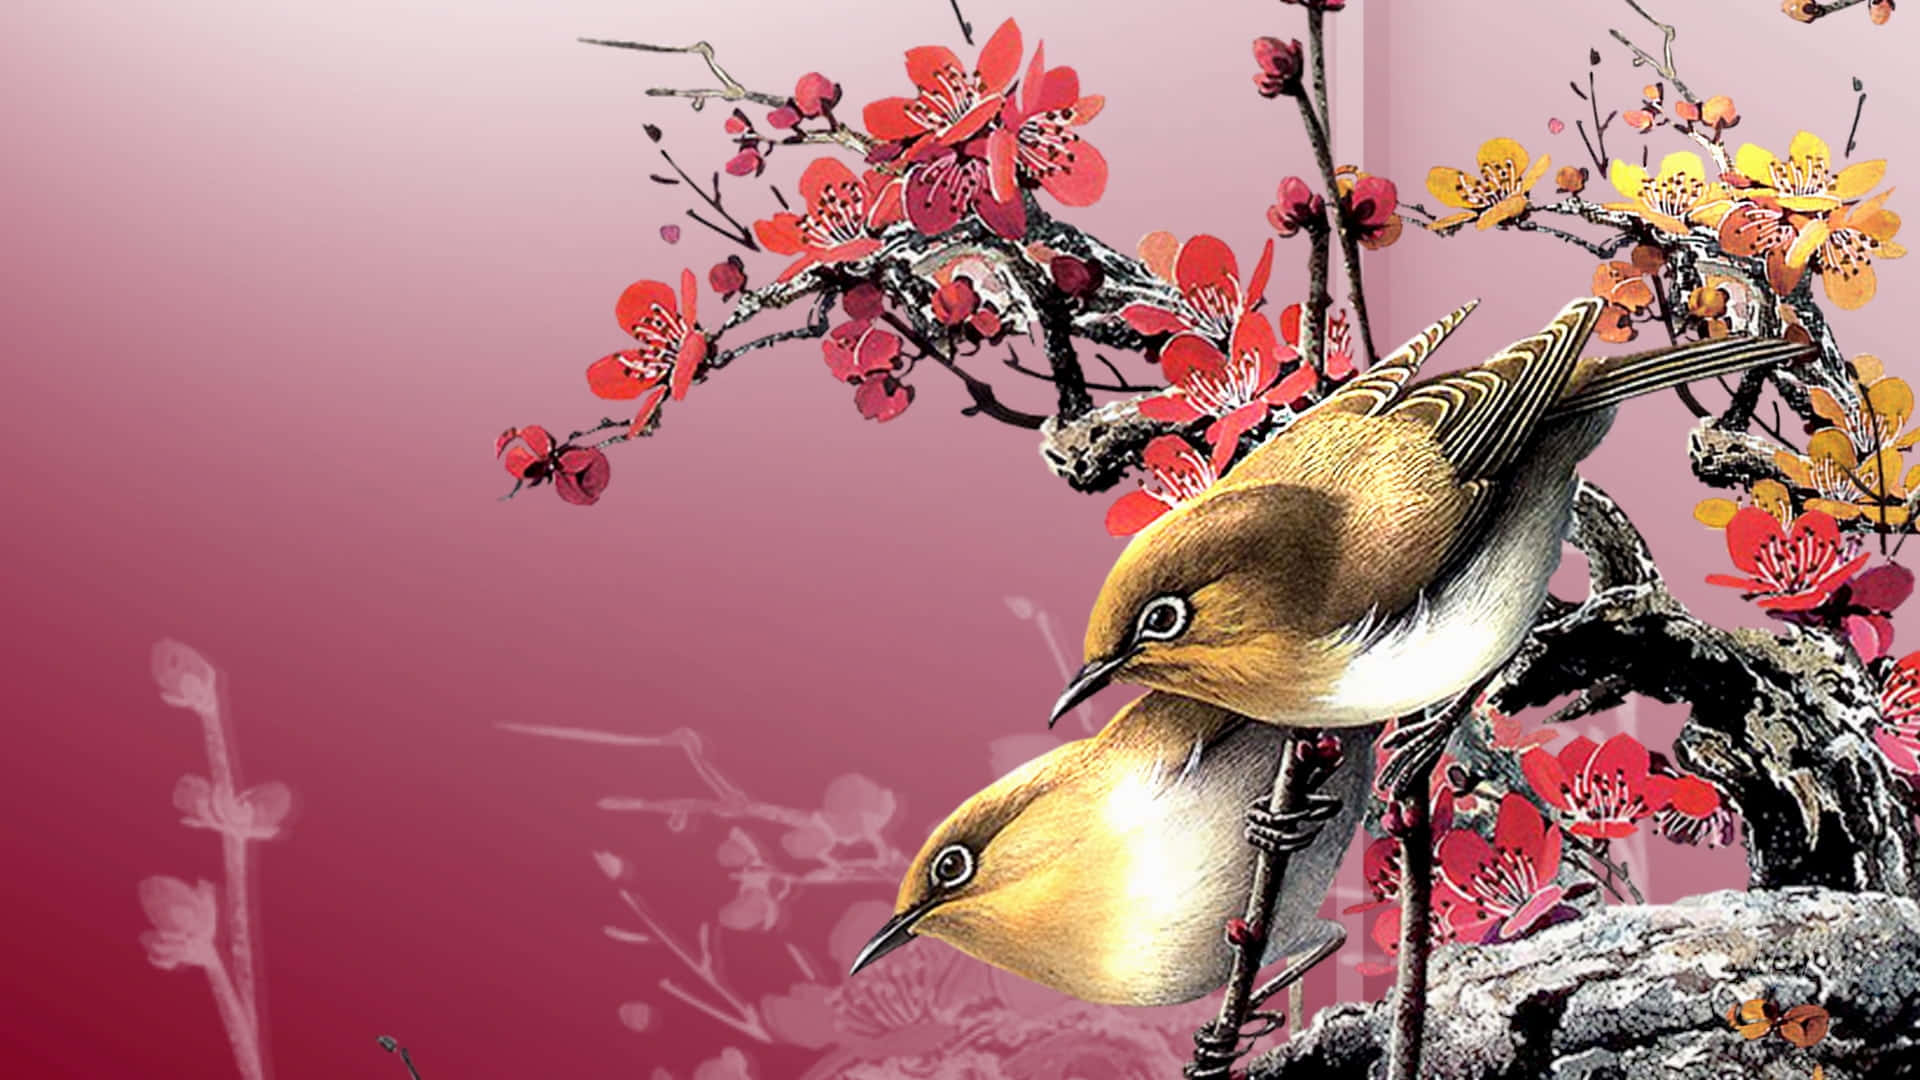 A vibrant scene of colorful birds perched on blossoming branches Wallpaper